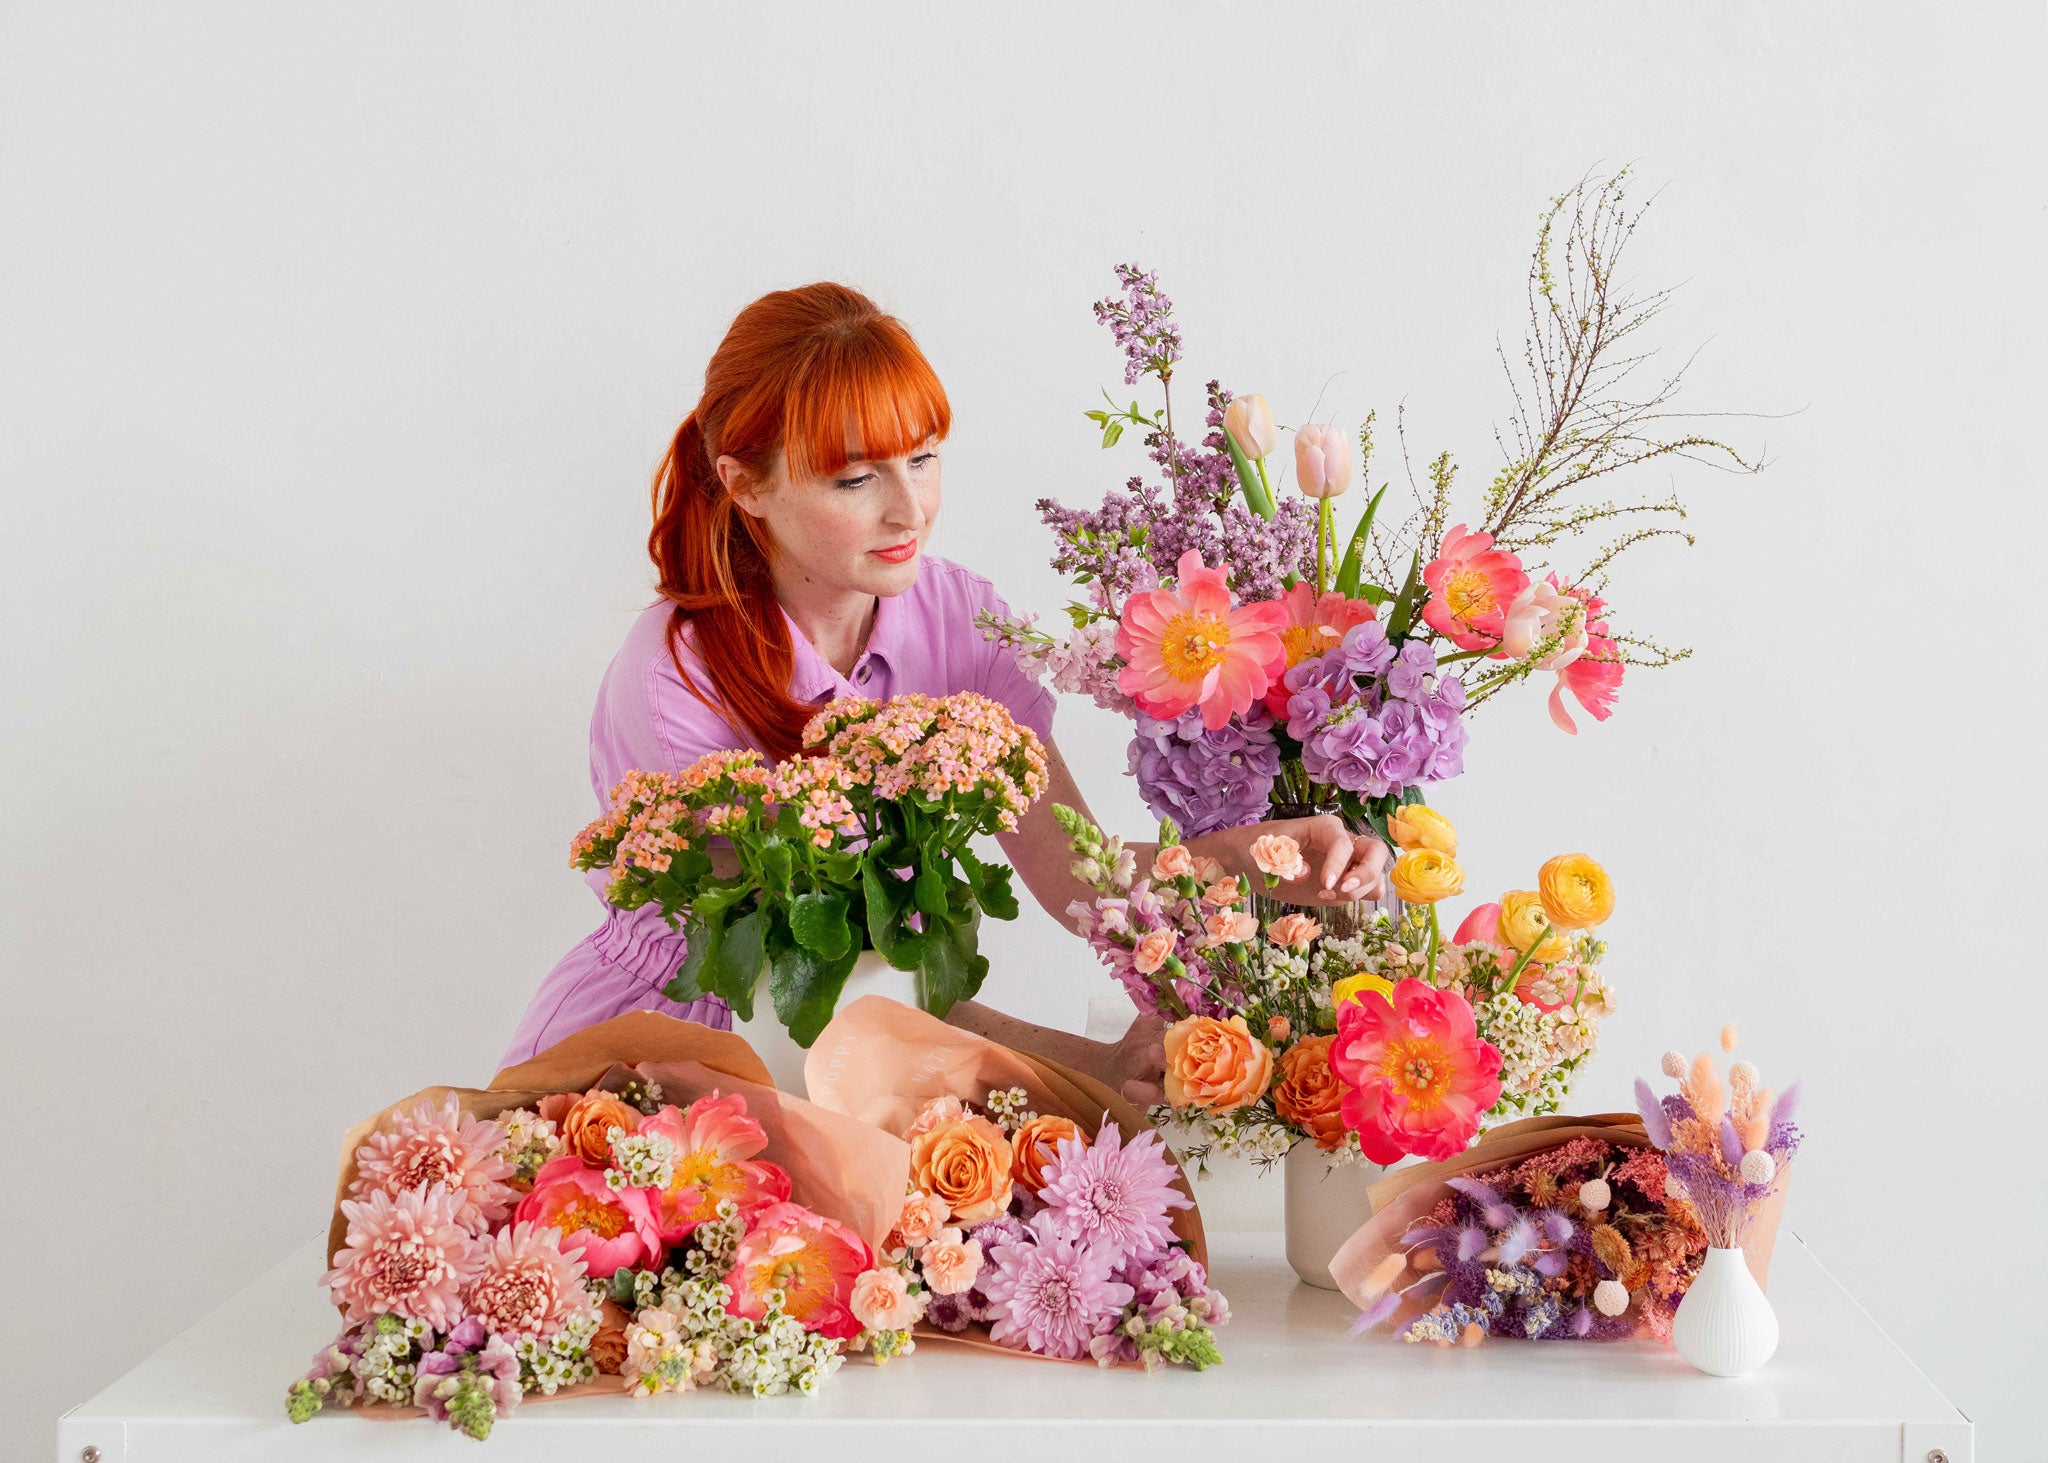 Florist arranging a group of Mother’s Day flowers